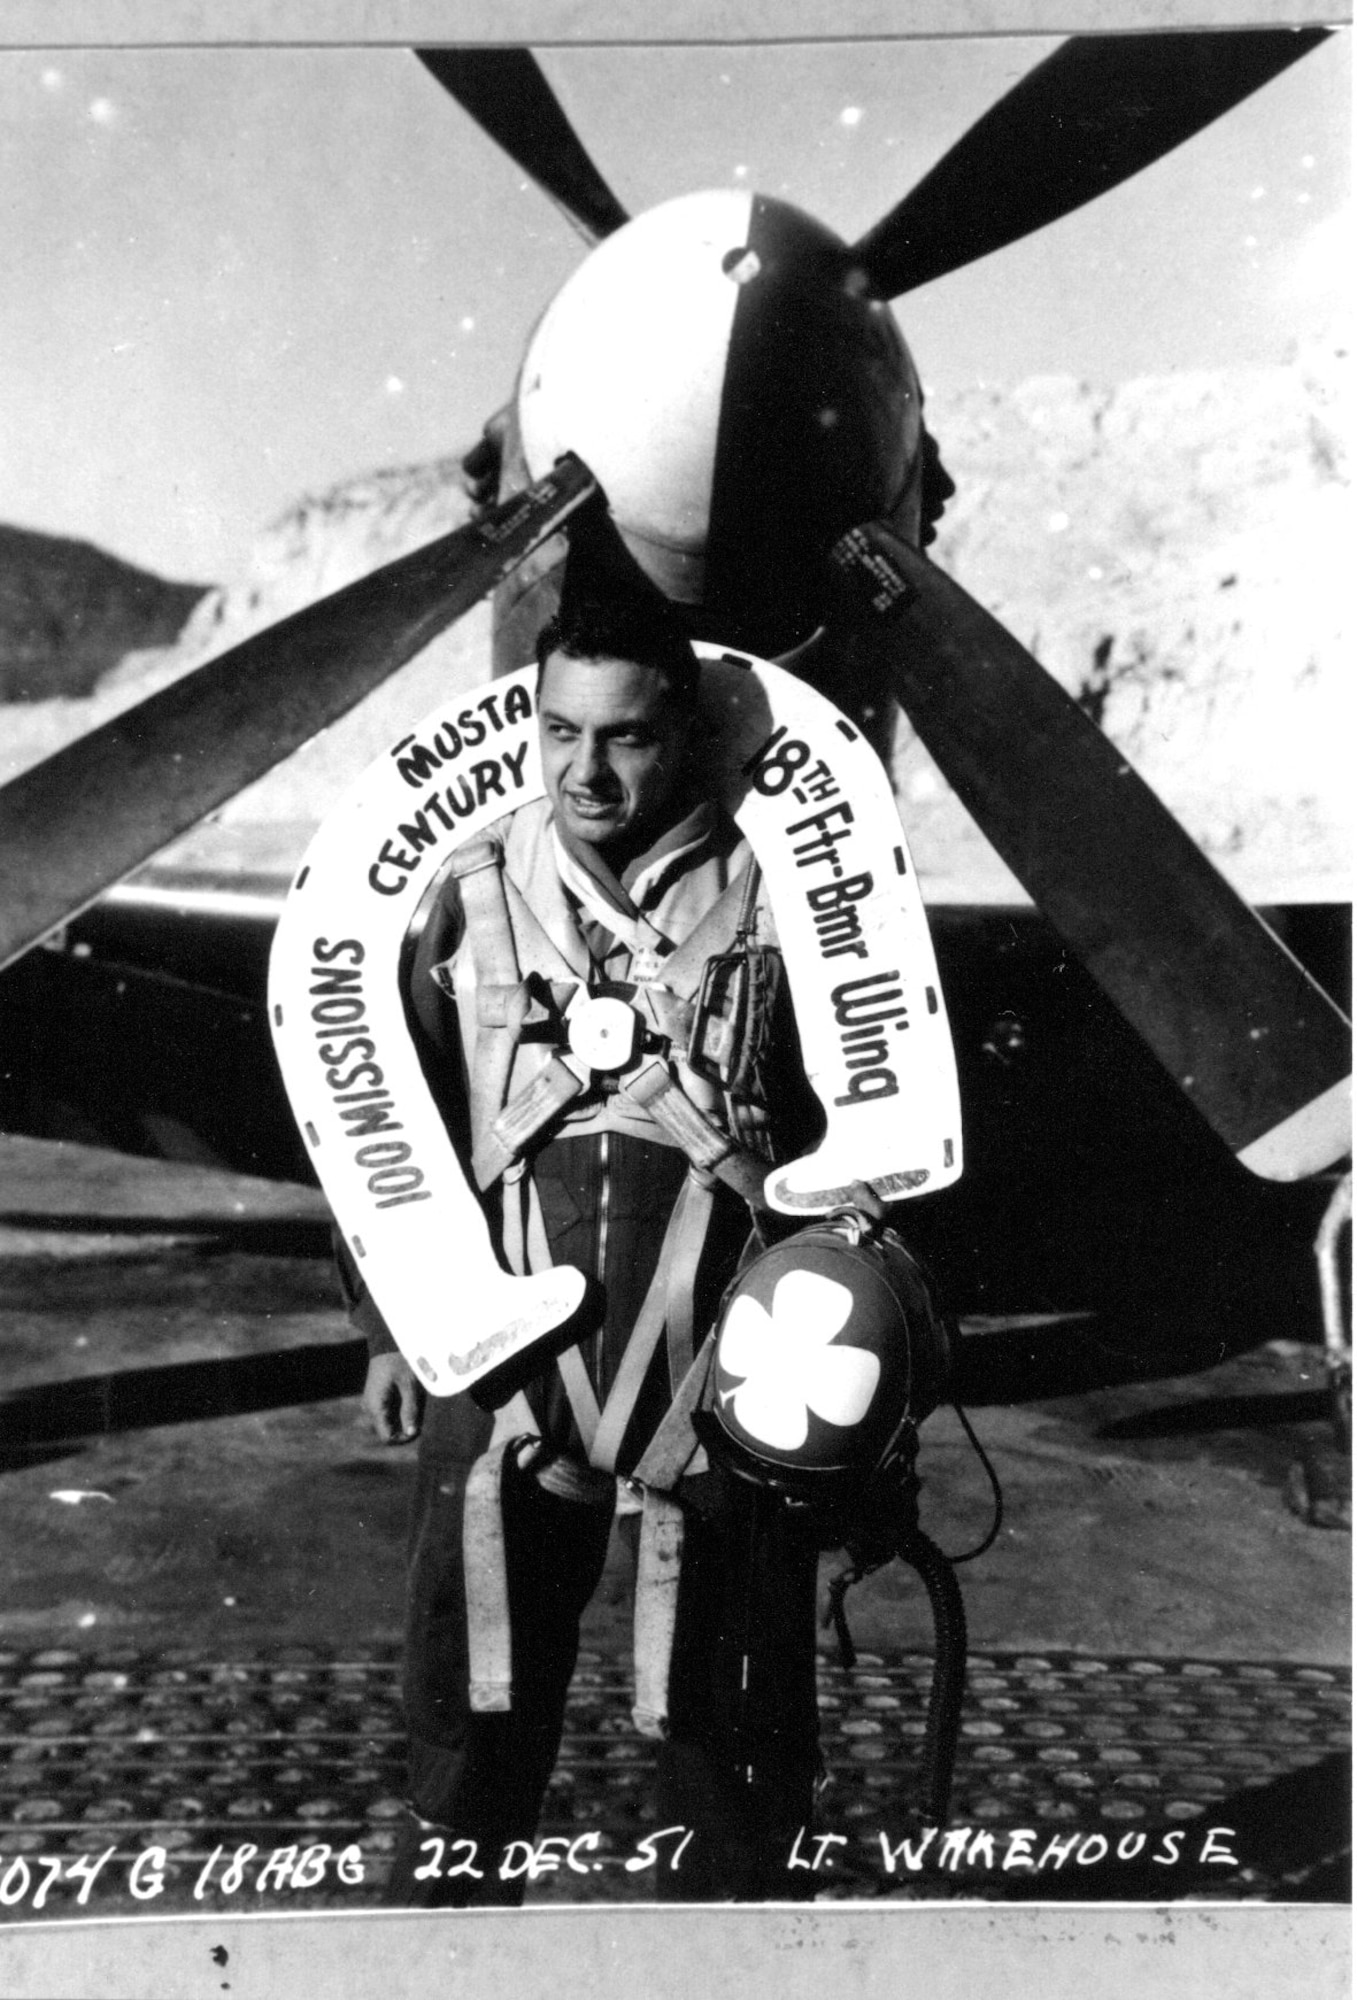 Oregon Air Guardsman Ernest Wakehouse celebrates completion of his 100th combat mission in Korea, which he flew on December 16, 1951.